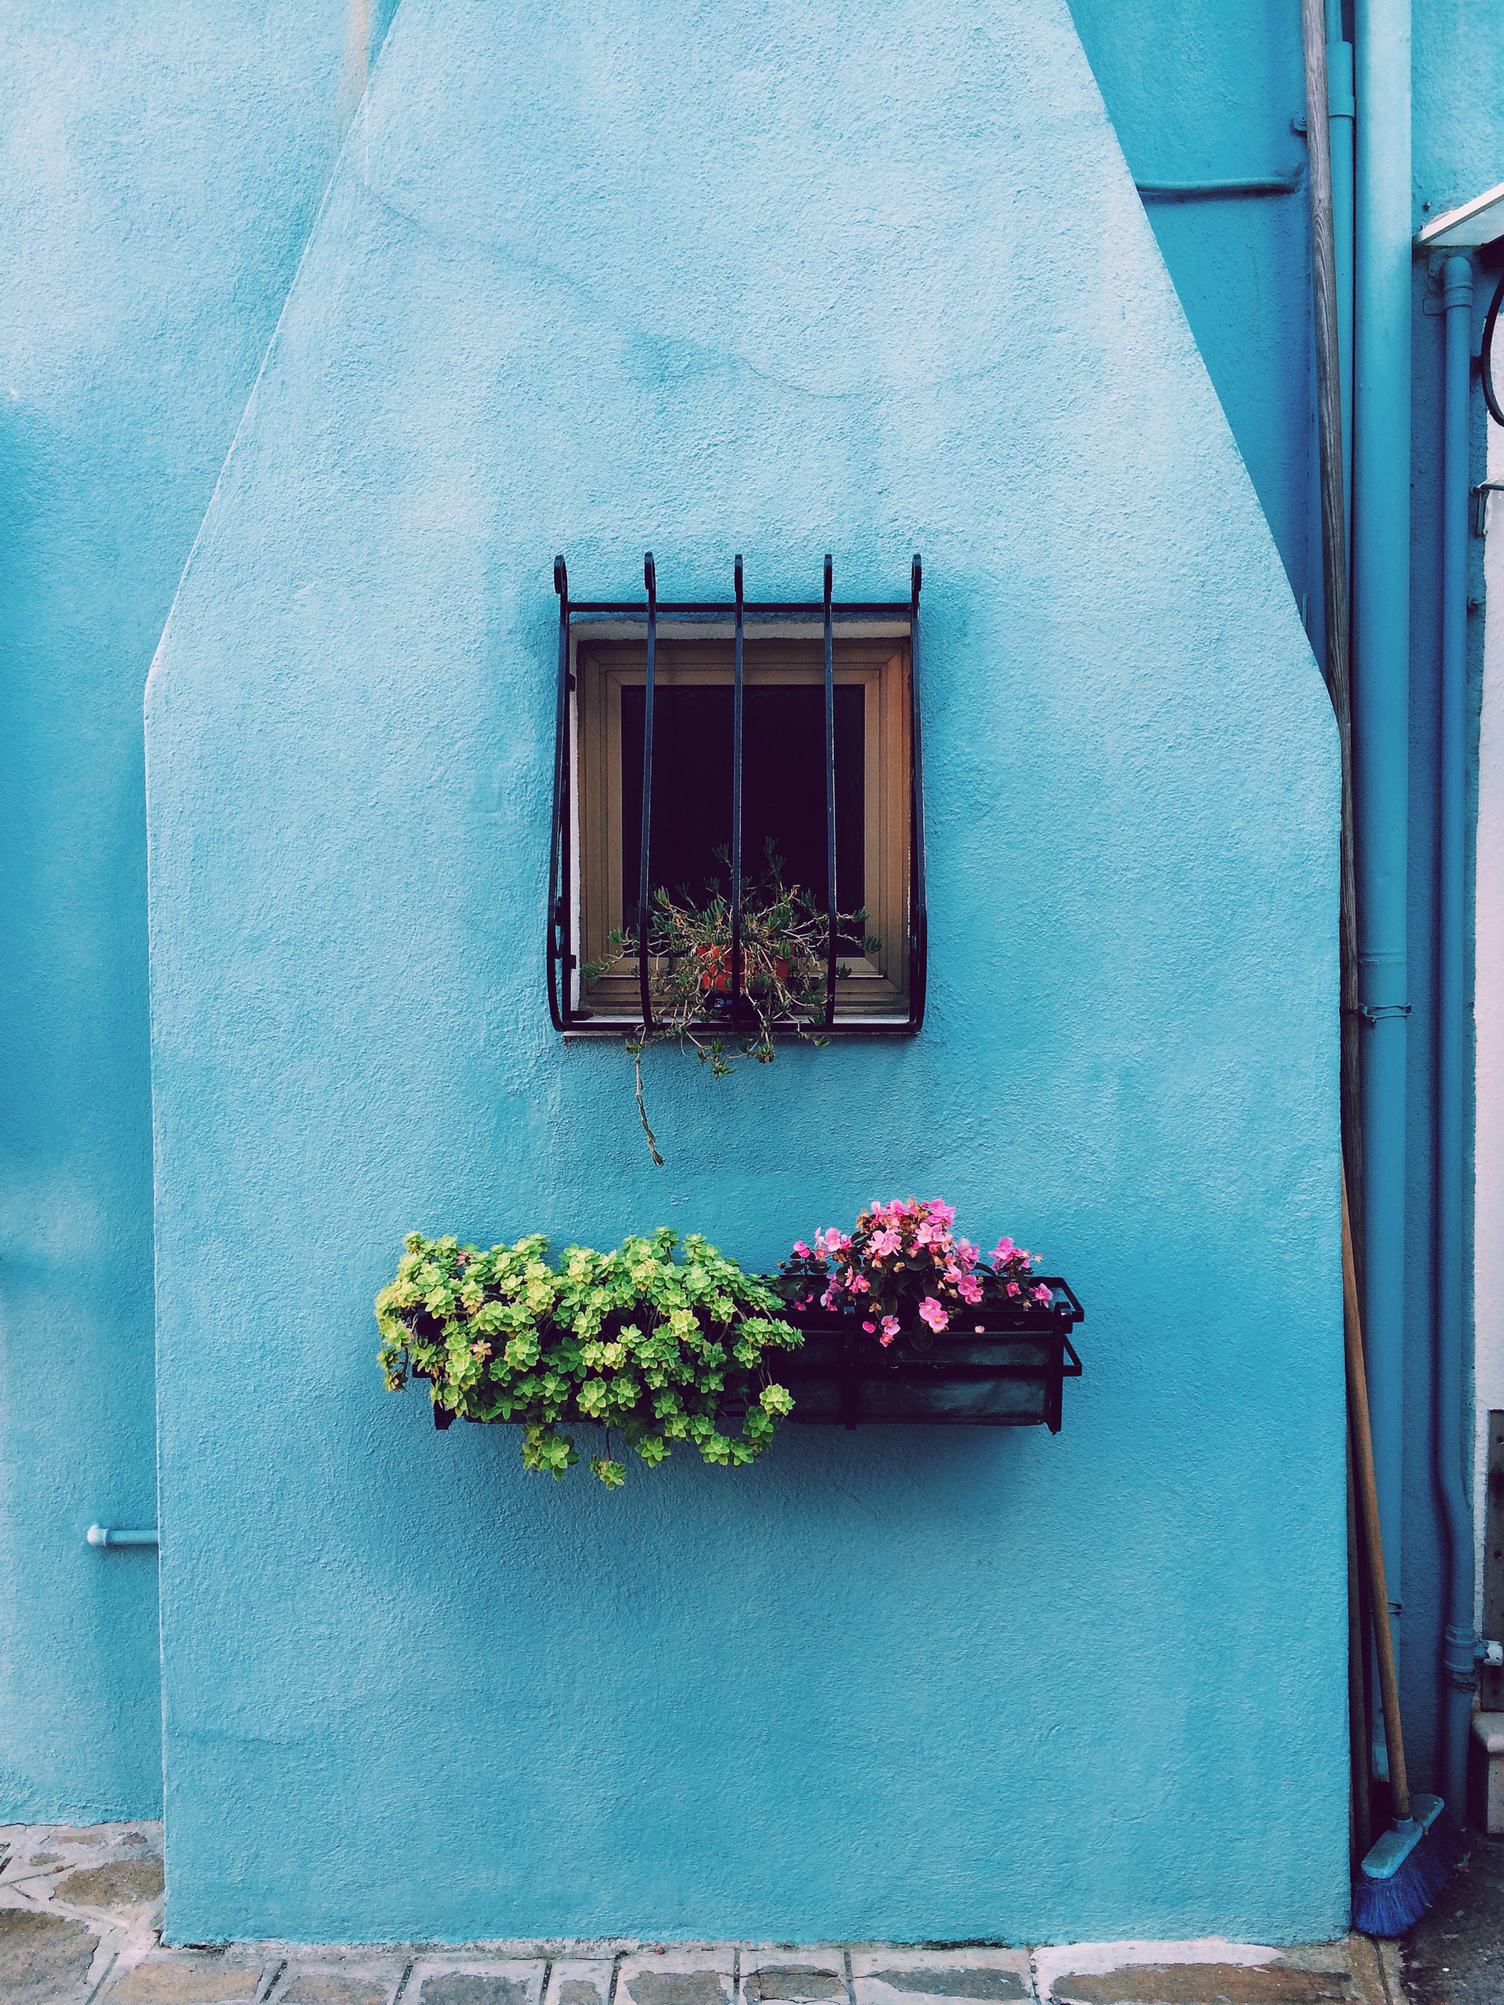 Window Flower Box with Blooming Flowers against Blue Wall